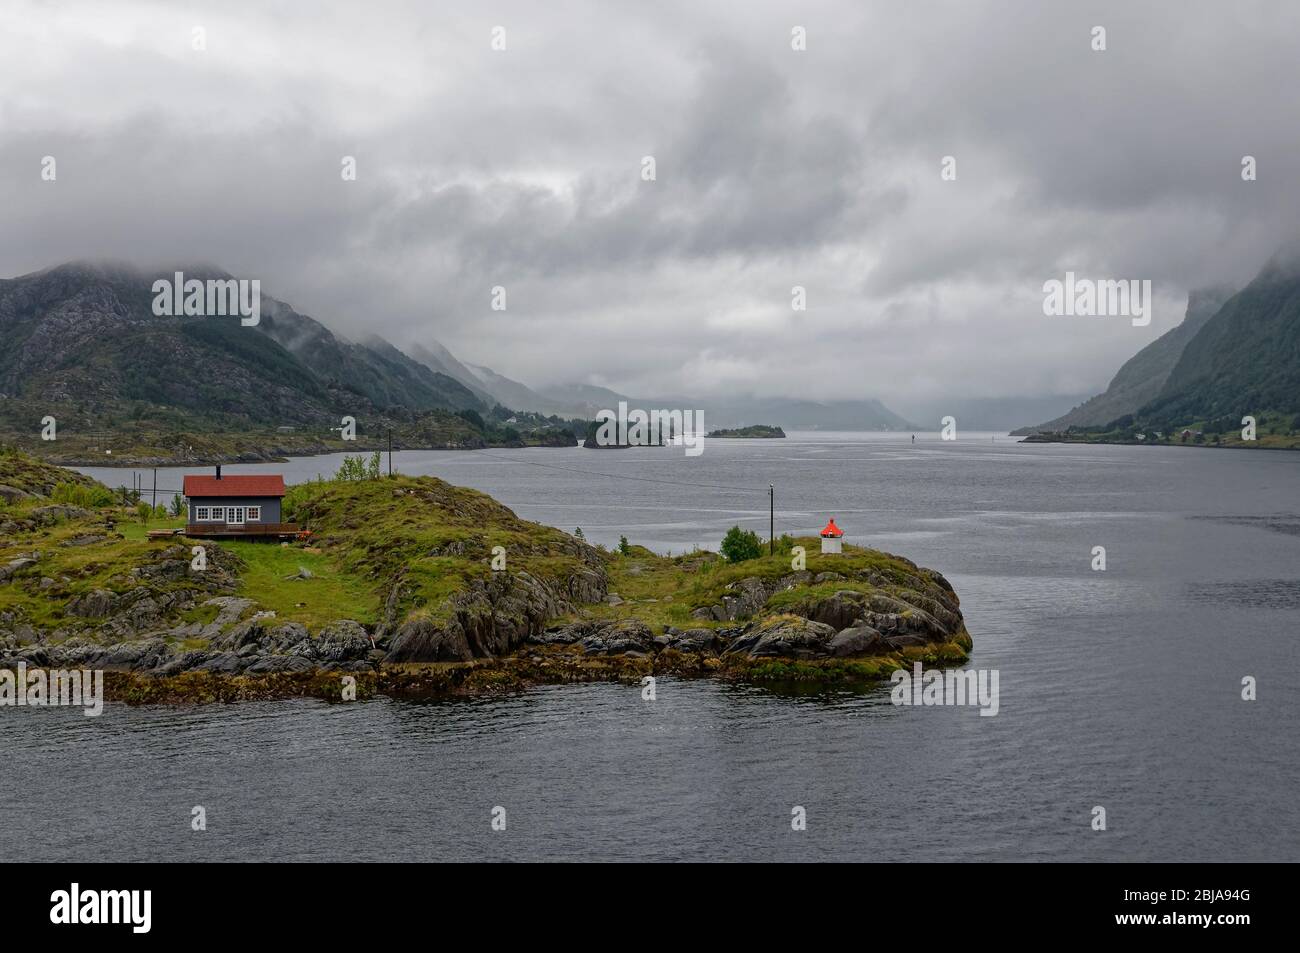 A Norwegian Cabin and Lighthouse on a small Island in the middle of a Fjord on a wet, overcast day with low cloud in late Summer. Stock Photo